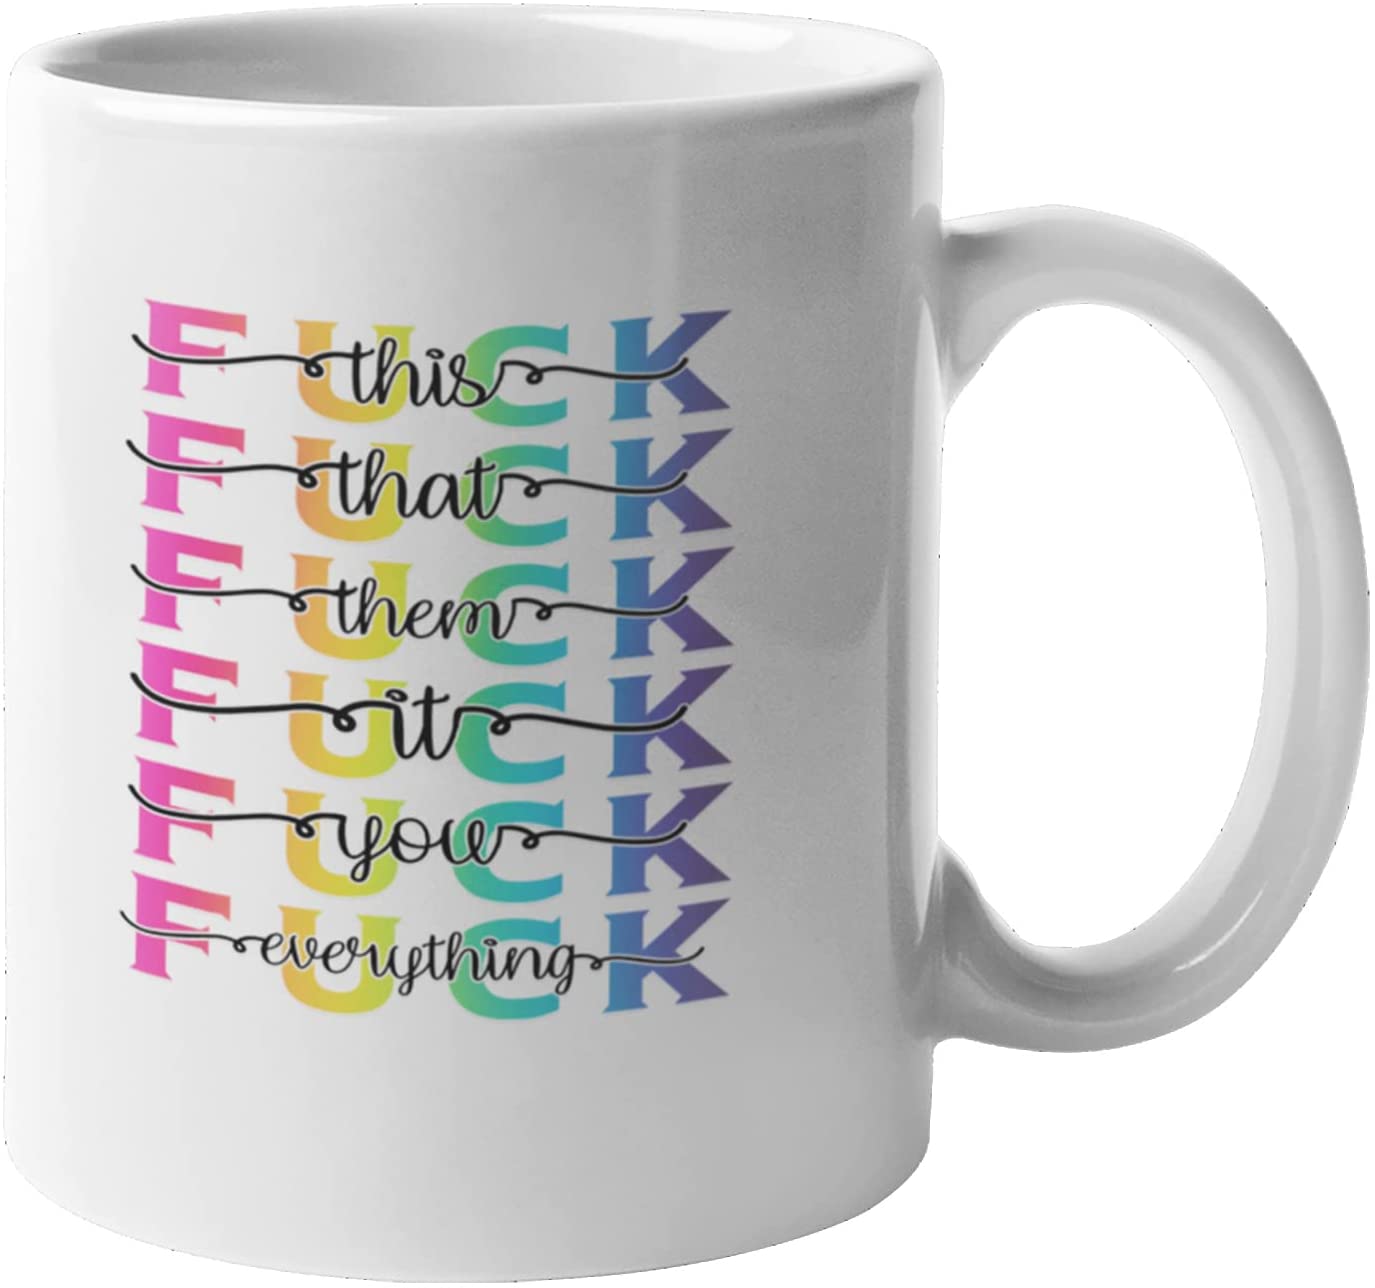 F*ck This/F*ck Everything Mug - Funny and Giftable 11oz Ceramic Coffee Cup